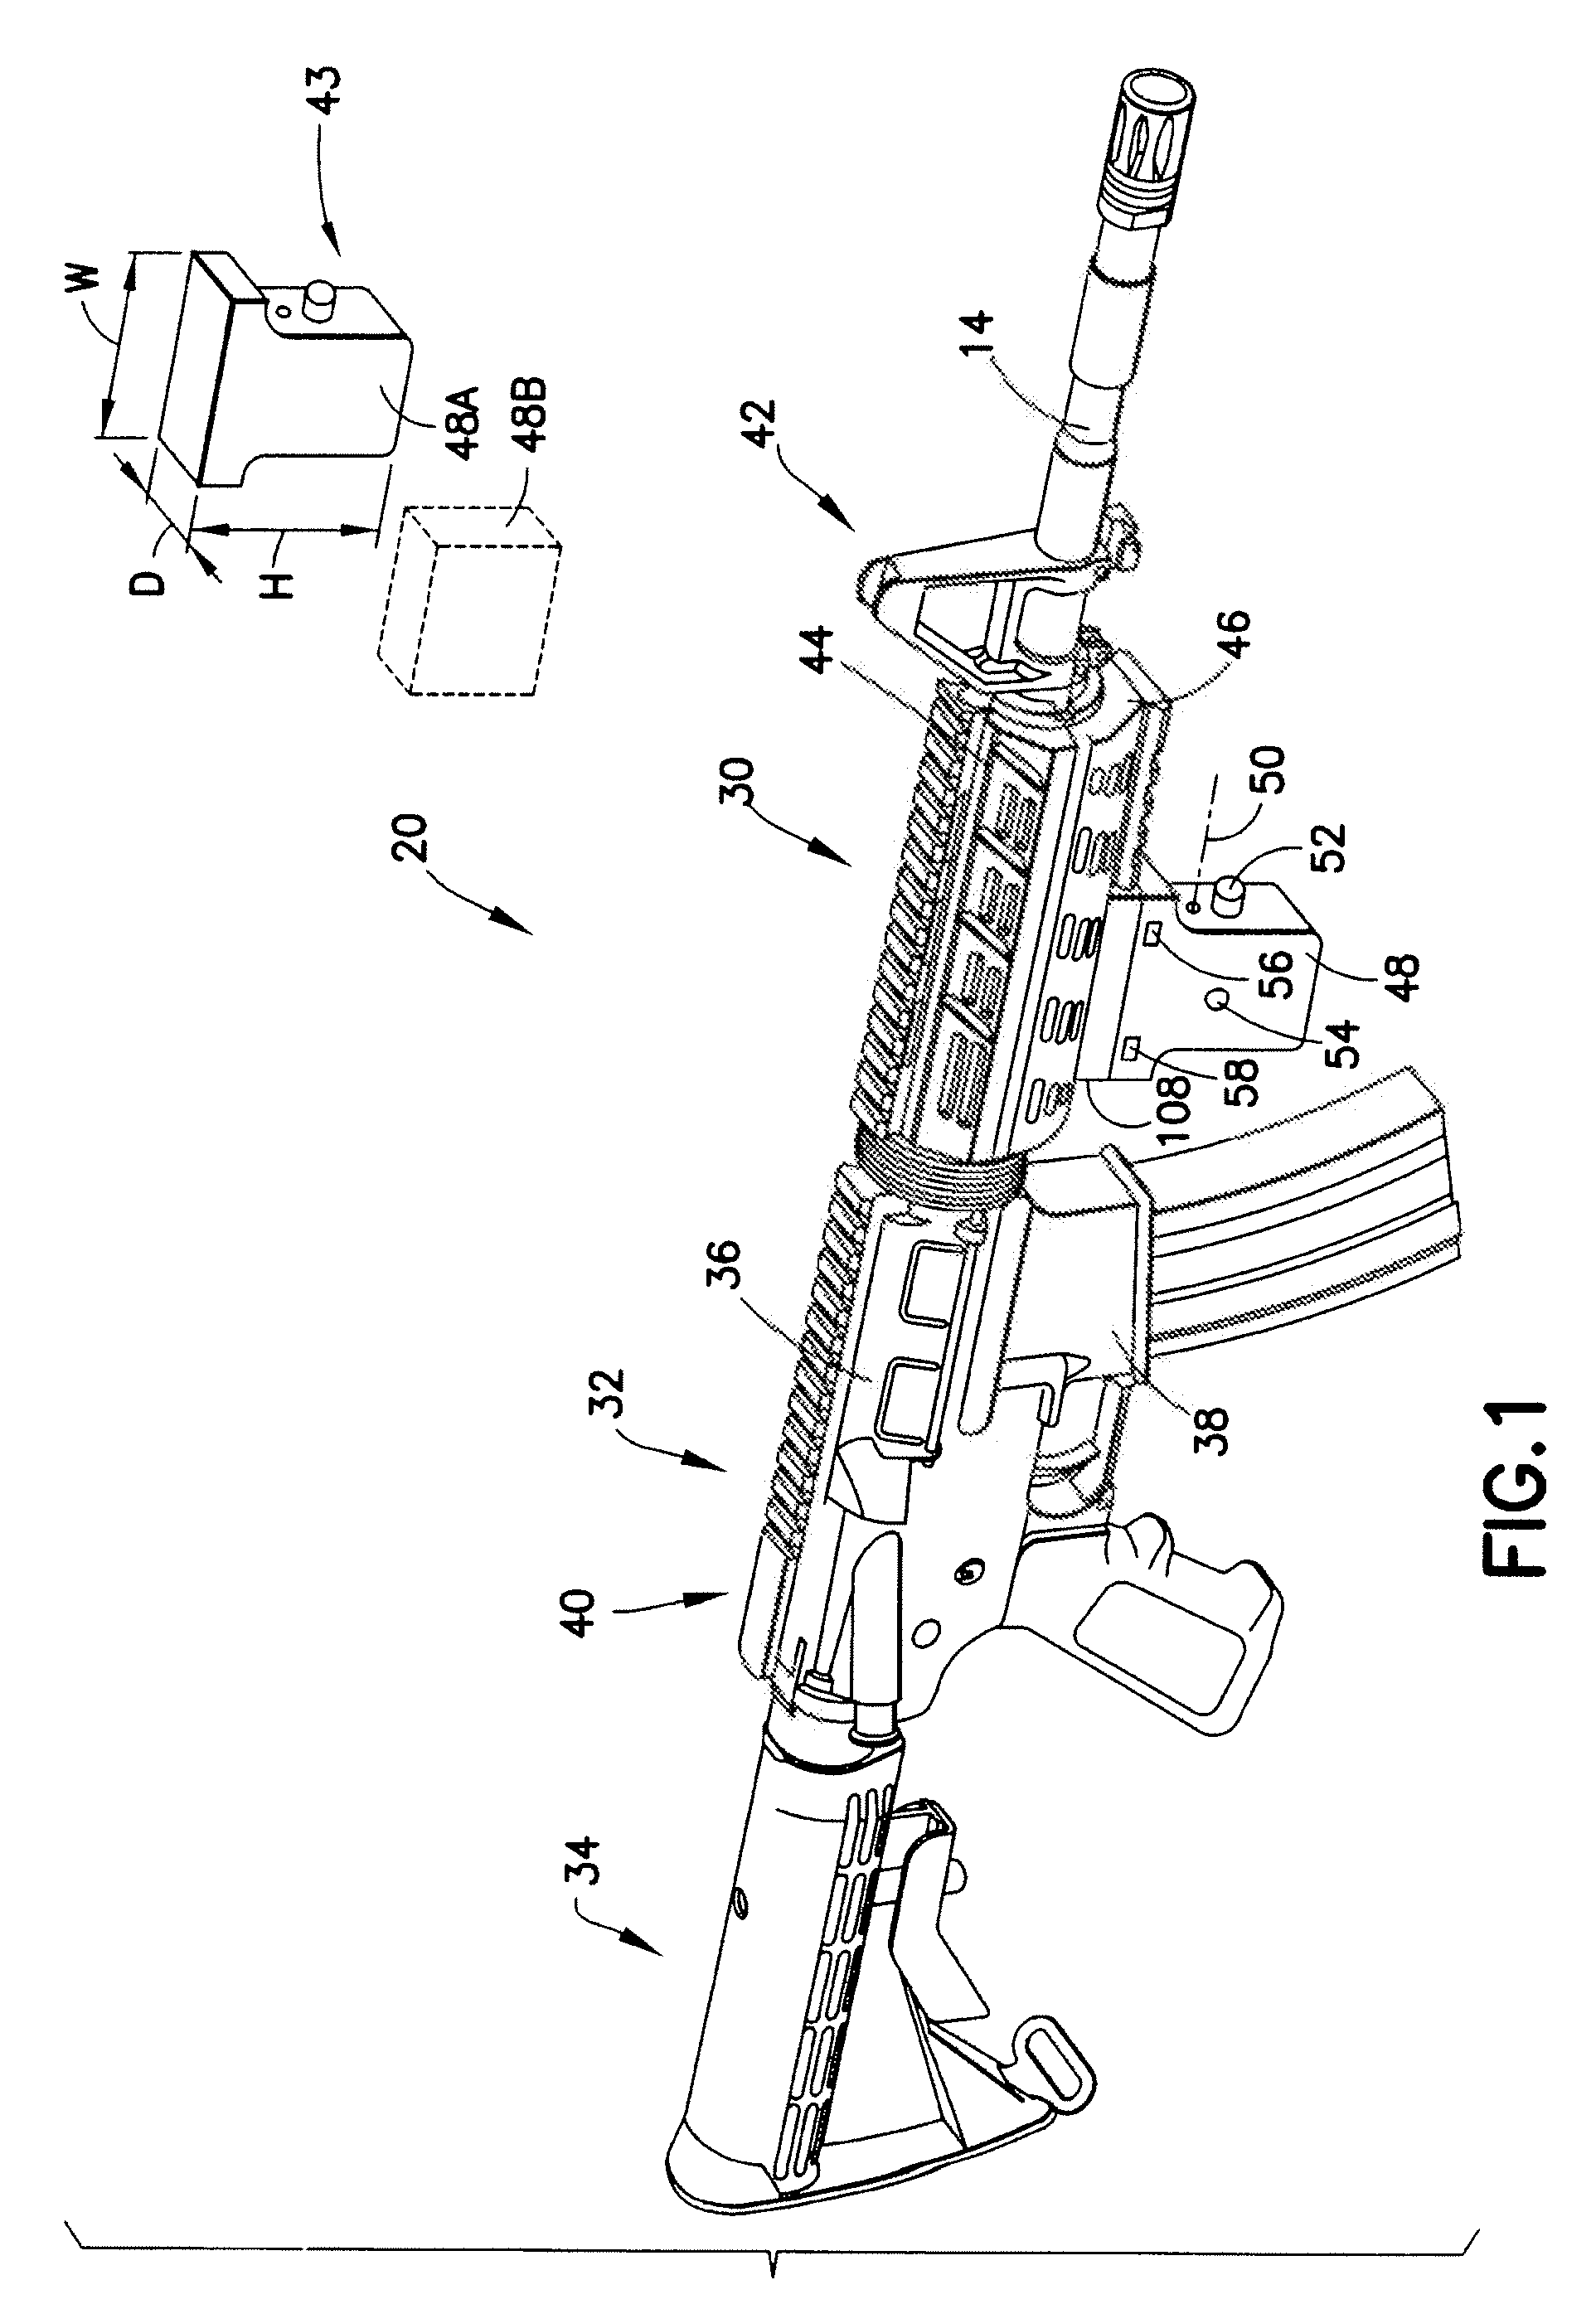 Hand grip system with integrated sight for mounting to firearm